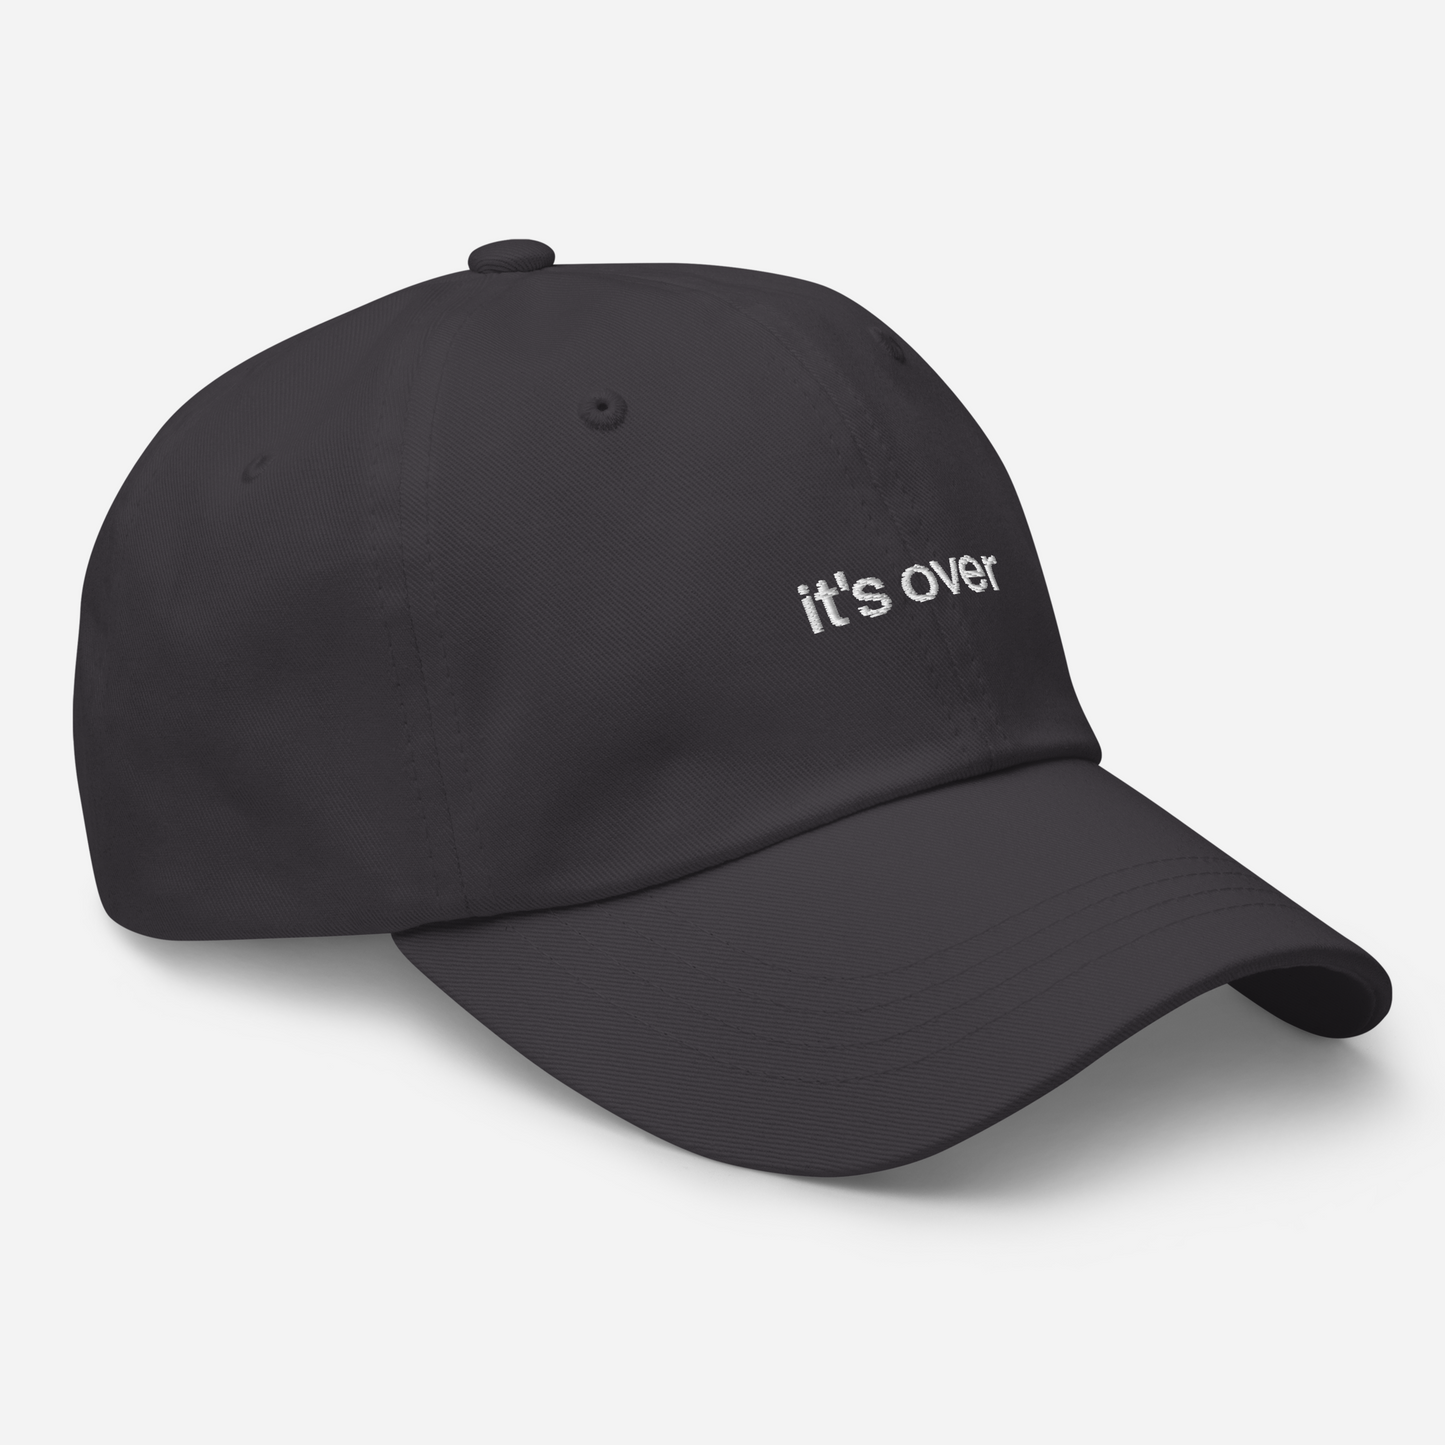 it's over hat